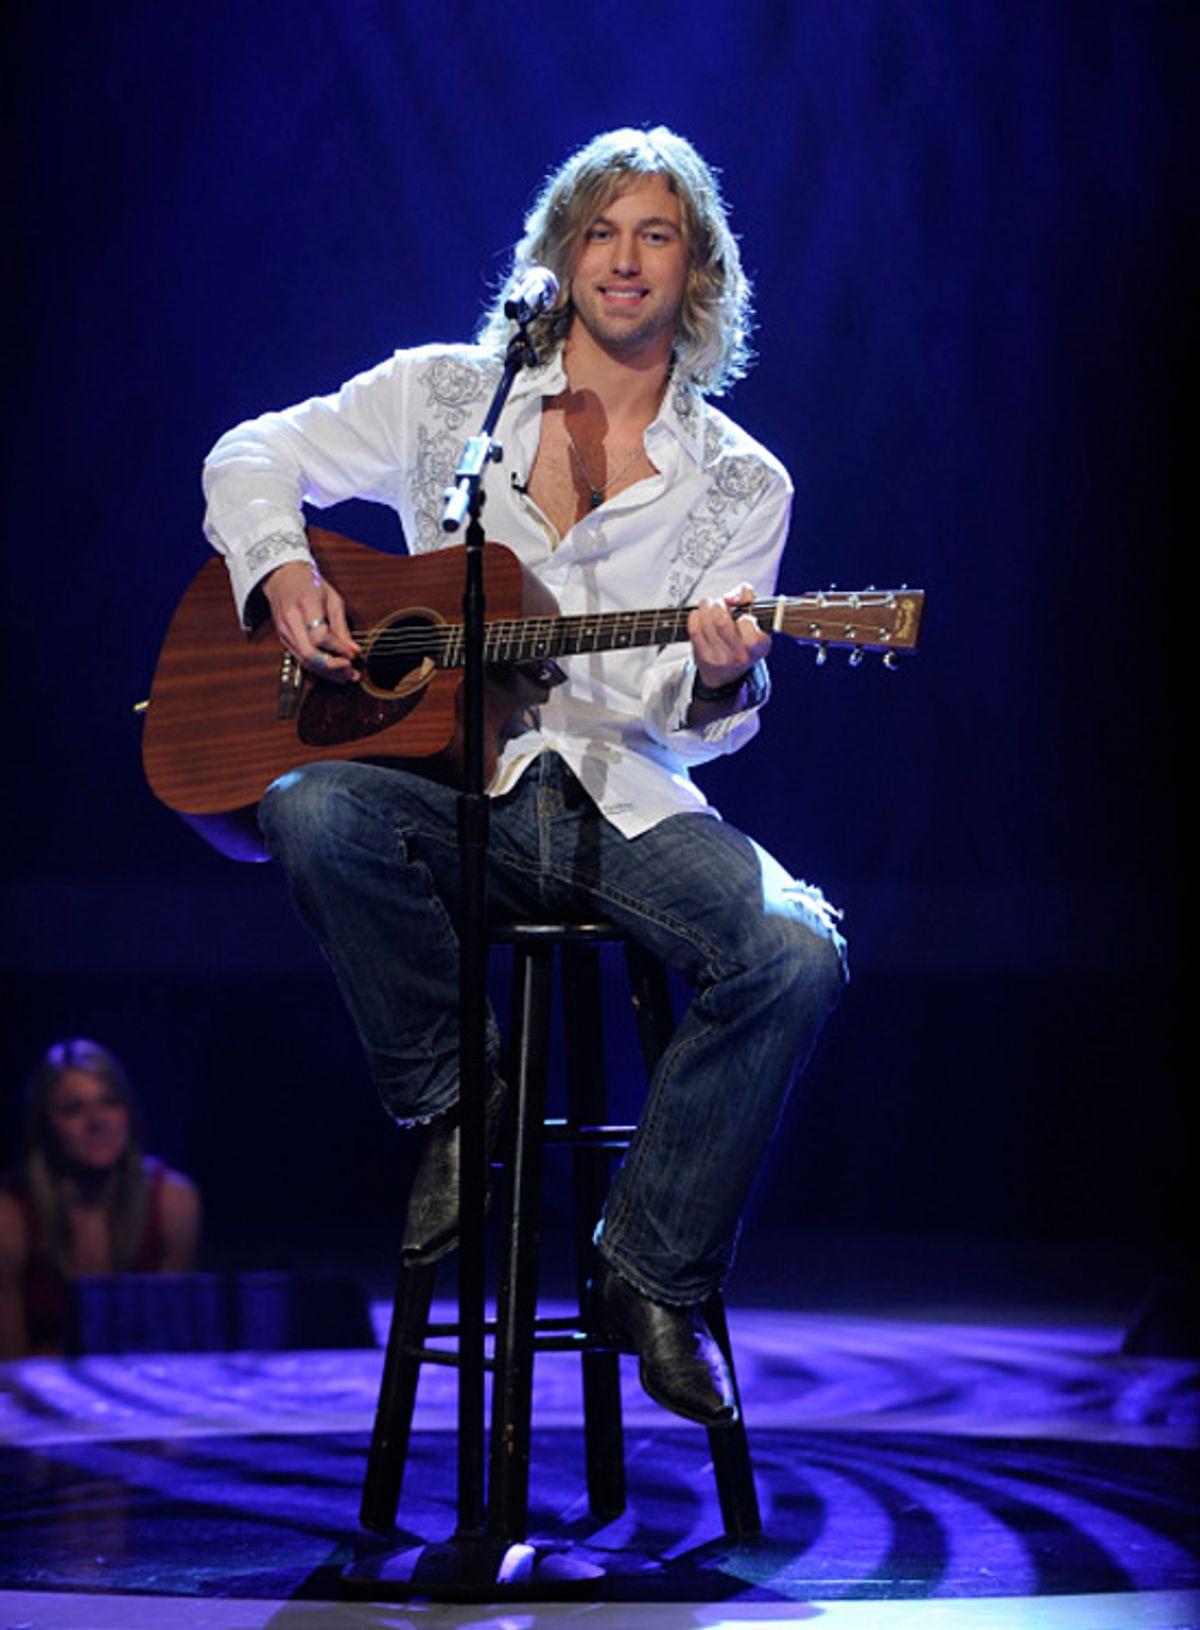 AMERICAN IDOL: TOP 24:  Casey James performs in front of the judges on AMERICAN DOL airing Wednesday, Feb. 24 on FOX.  CR: Michael Becker/ FOX.